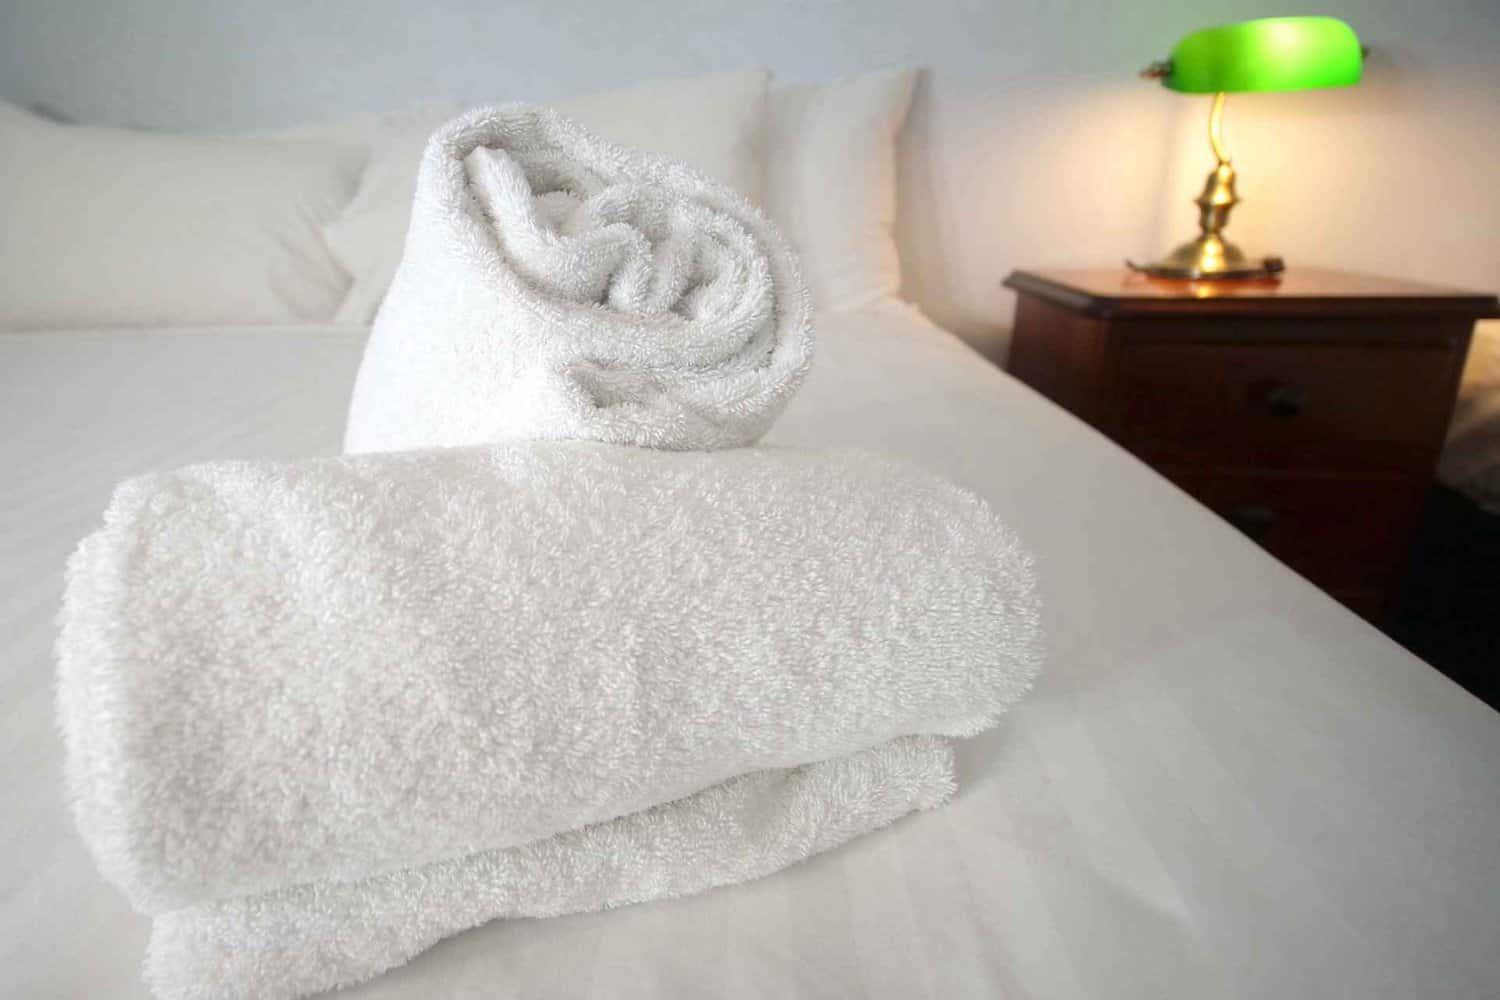 Fresh, neatly folded towels placed on a bed in a hotel room, with a stylish green lamp on the bedside table, highlighting the thoughtful touches and attention to detail offered in case you were wondering how long can you stay in a hotel